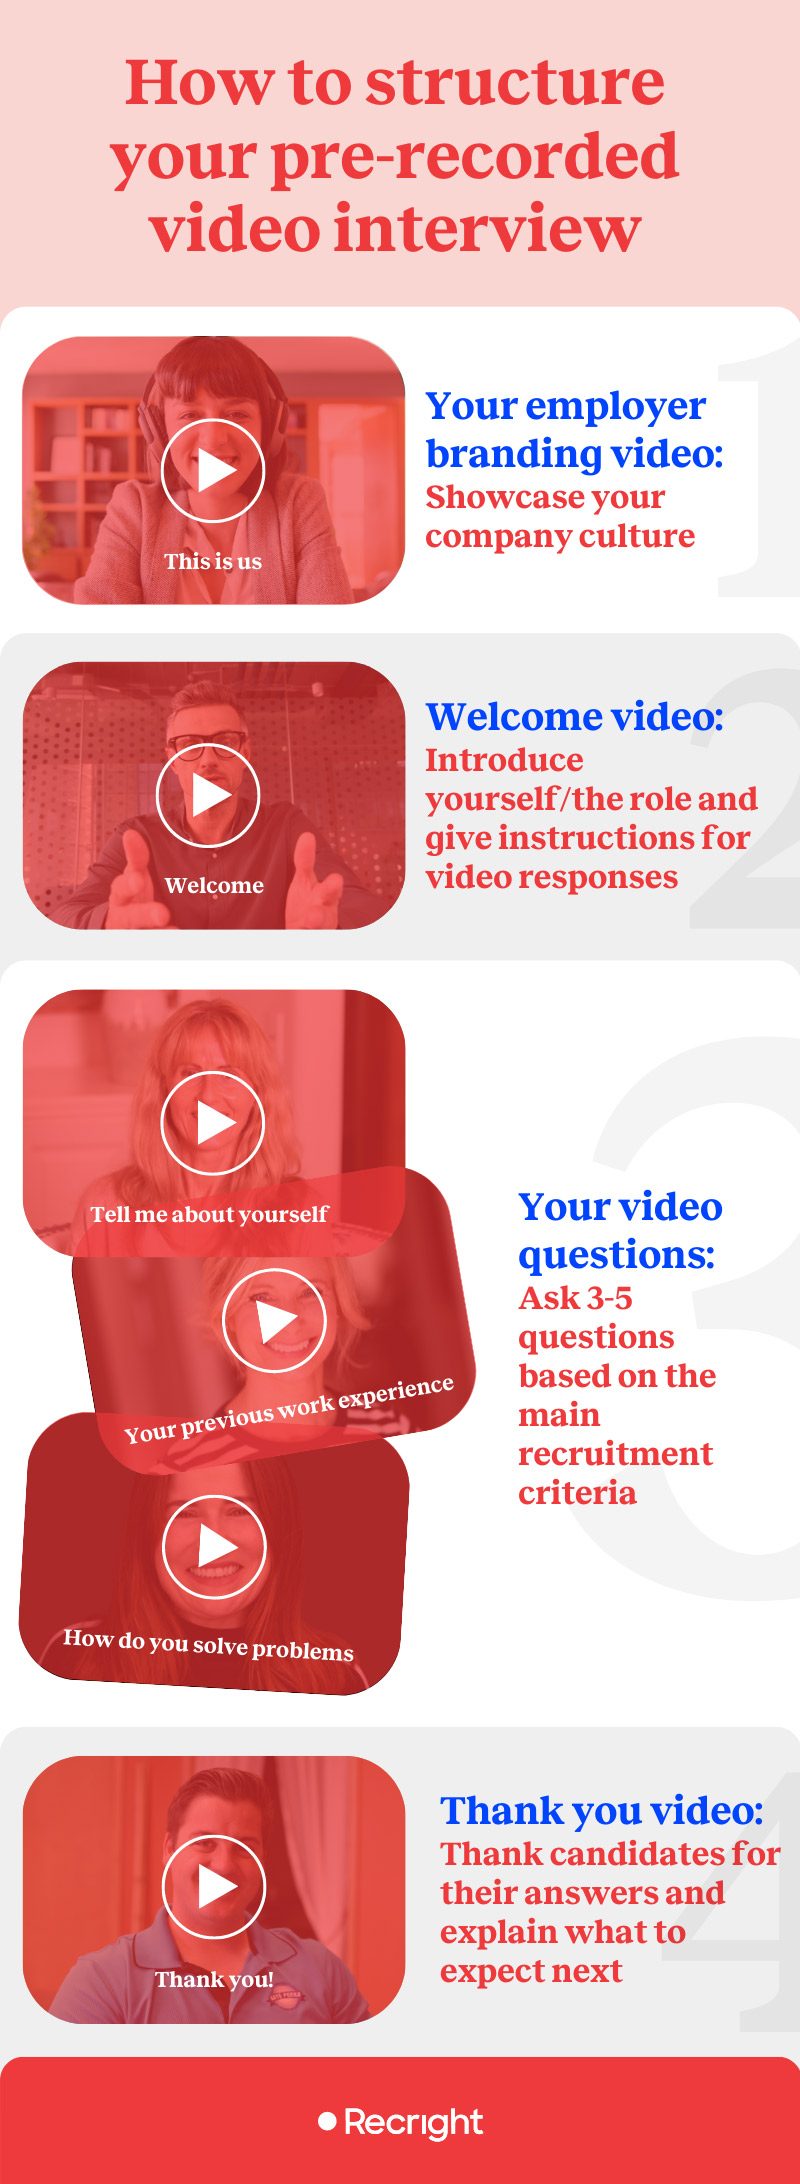 How-to-structure-your-pre-recorded-video-interview